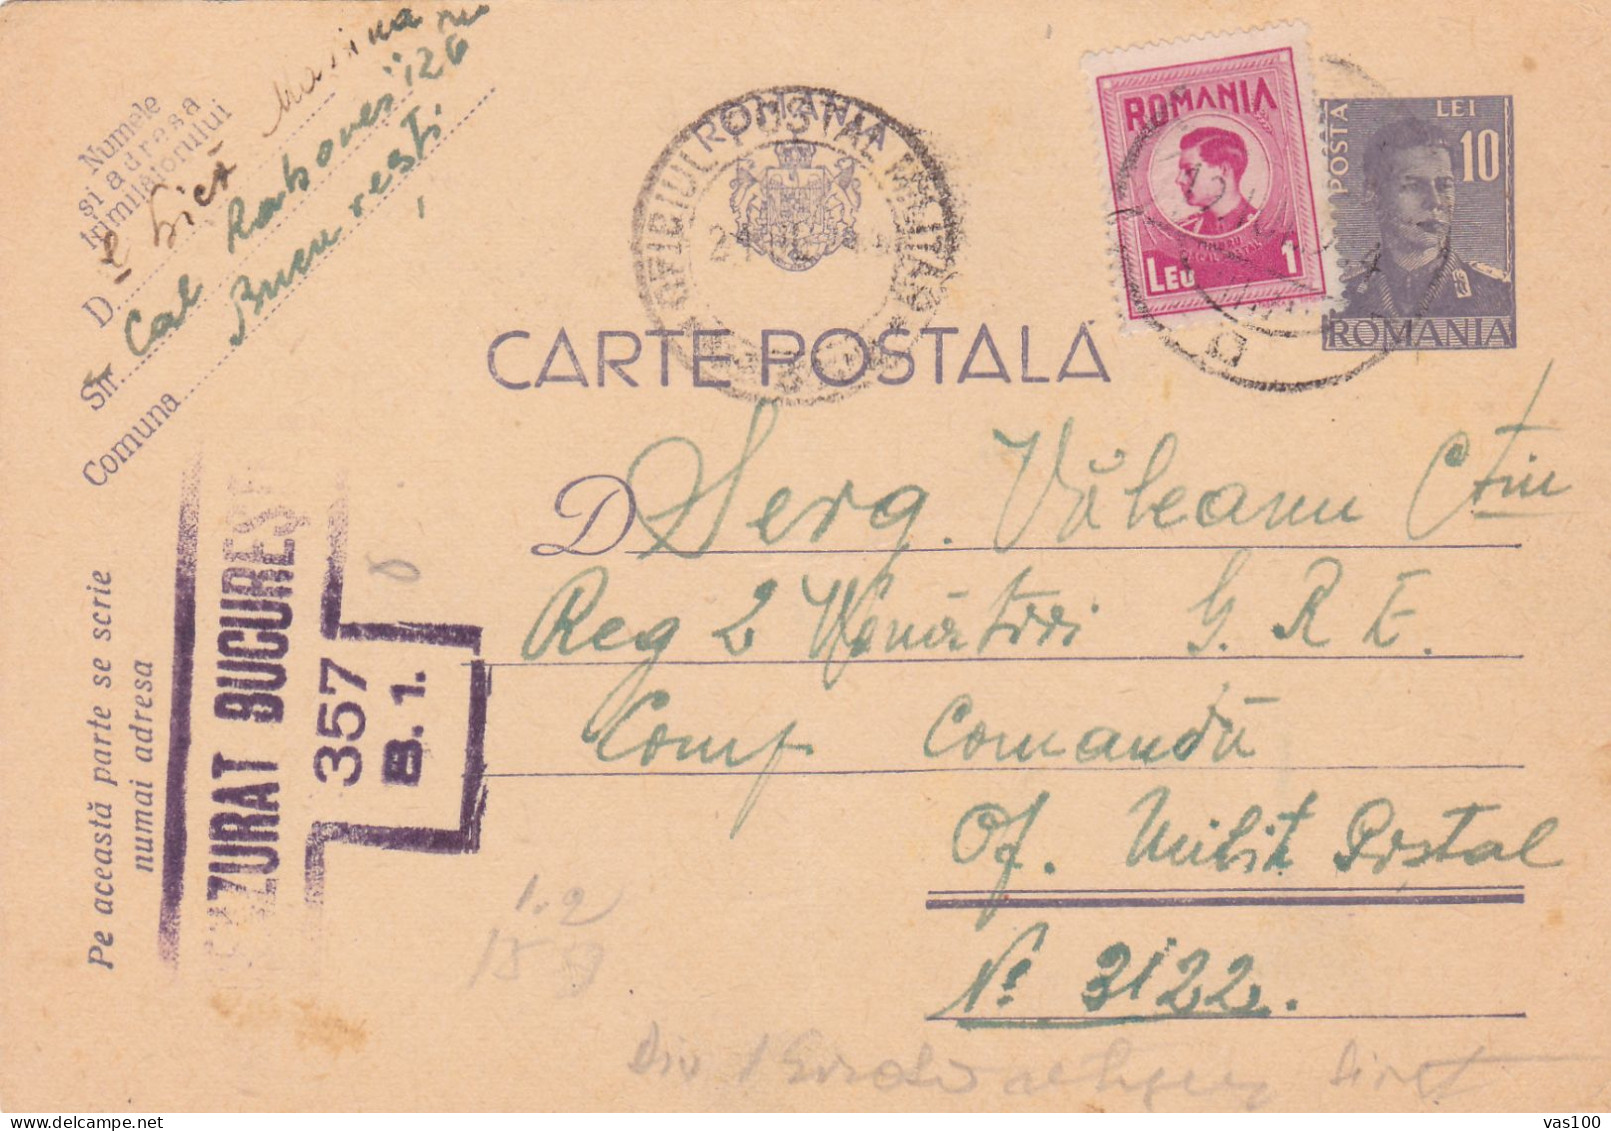 Romania, 1941, WWII  Censored, CENSOR OPM #3122, POSTCARD STATIONERY - Lettres 2ème Guerre Mondiale